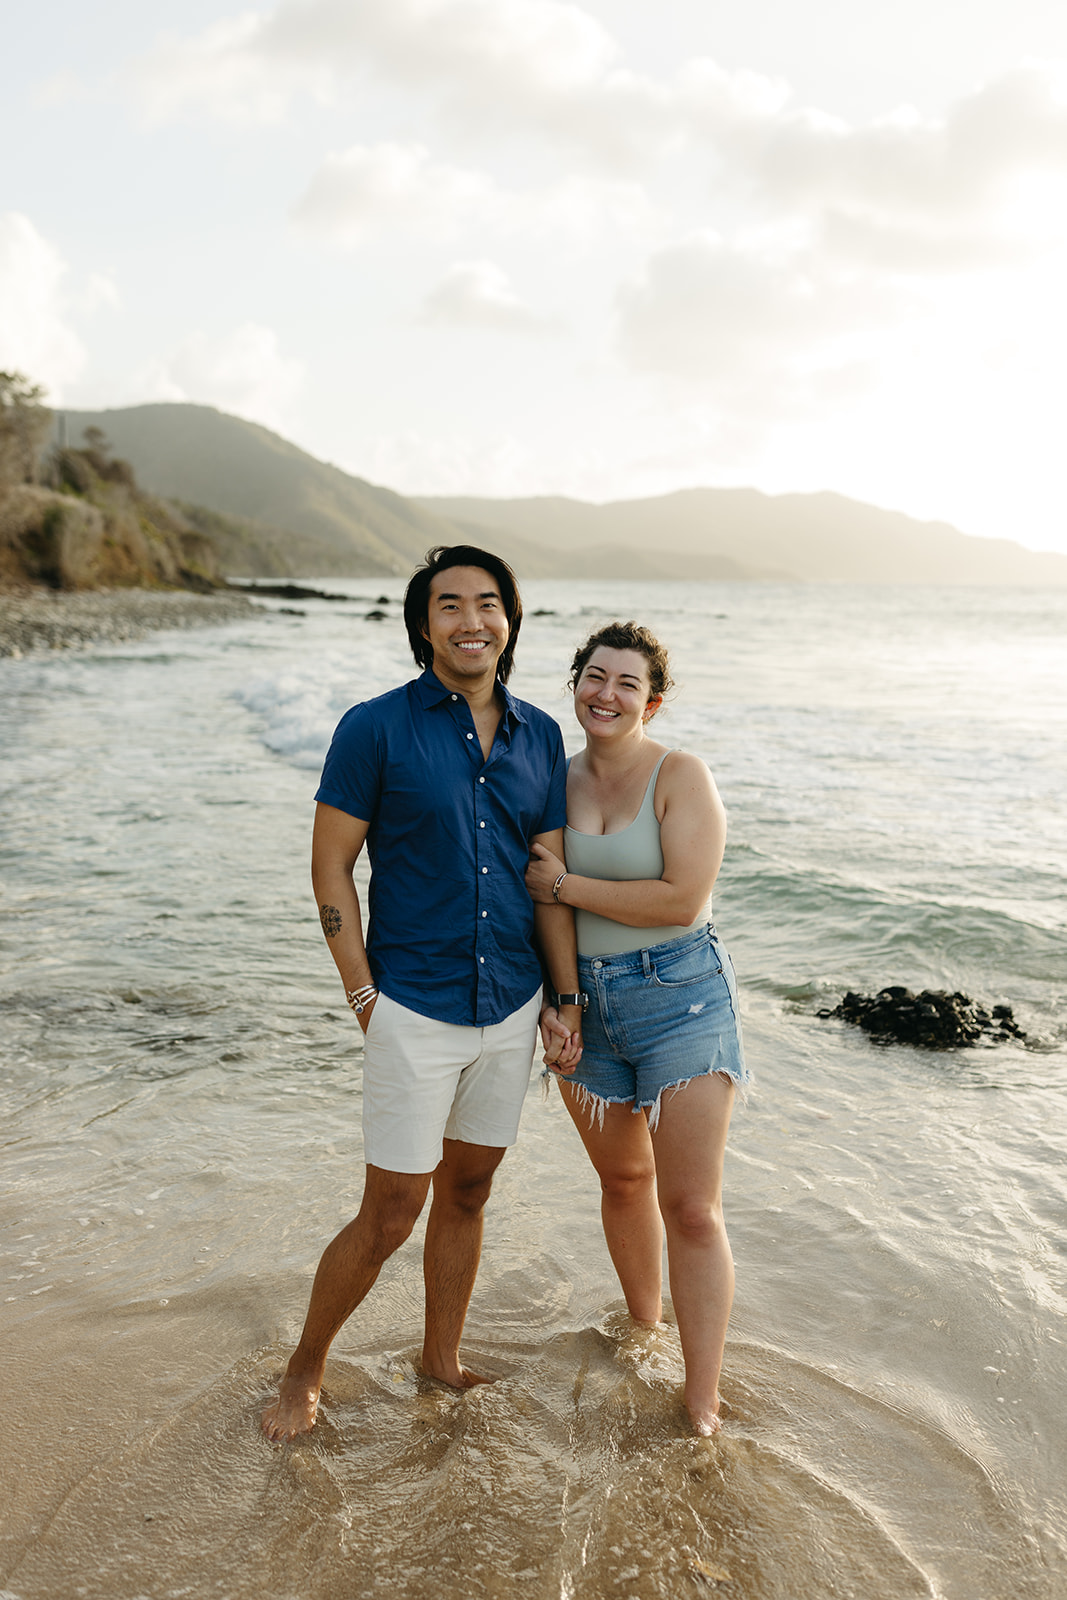 Engagement photo shoot on the beach in the US Virgin Islands at sunset